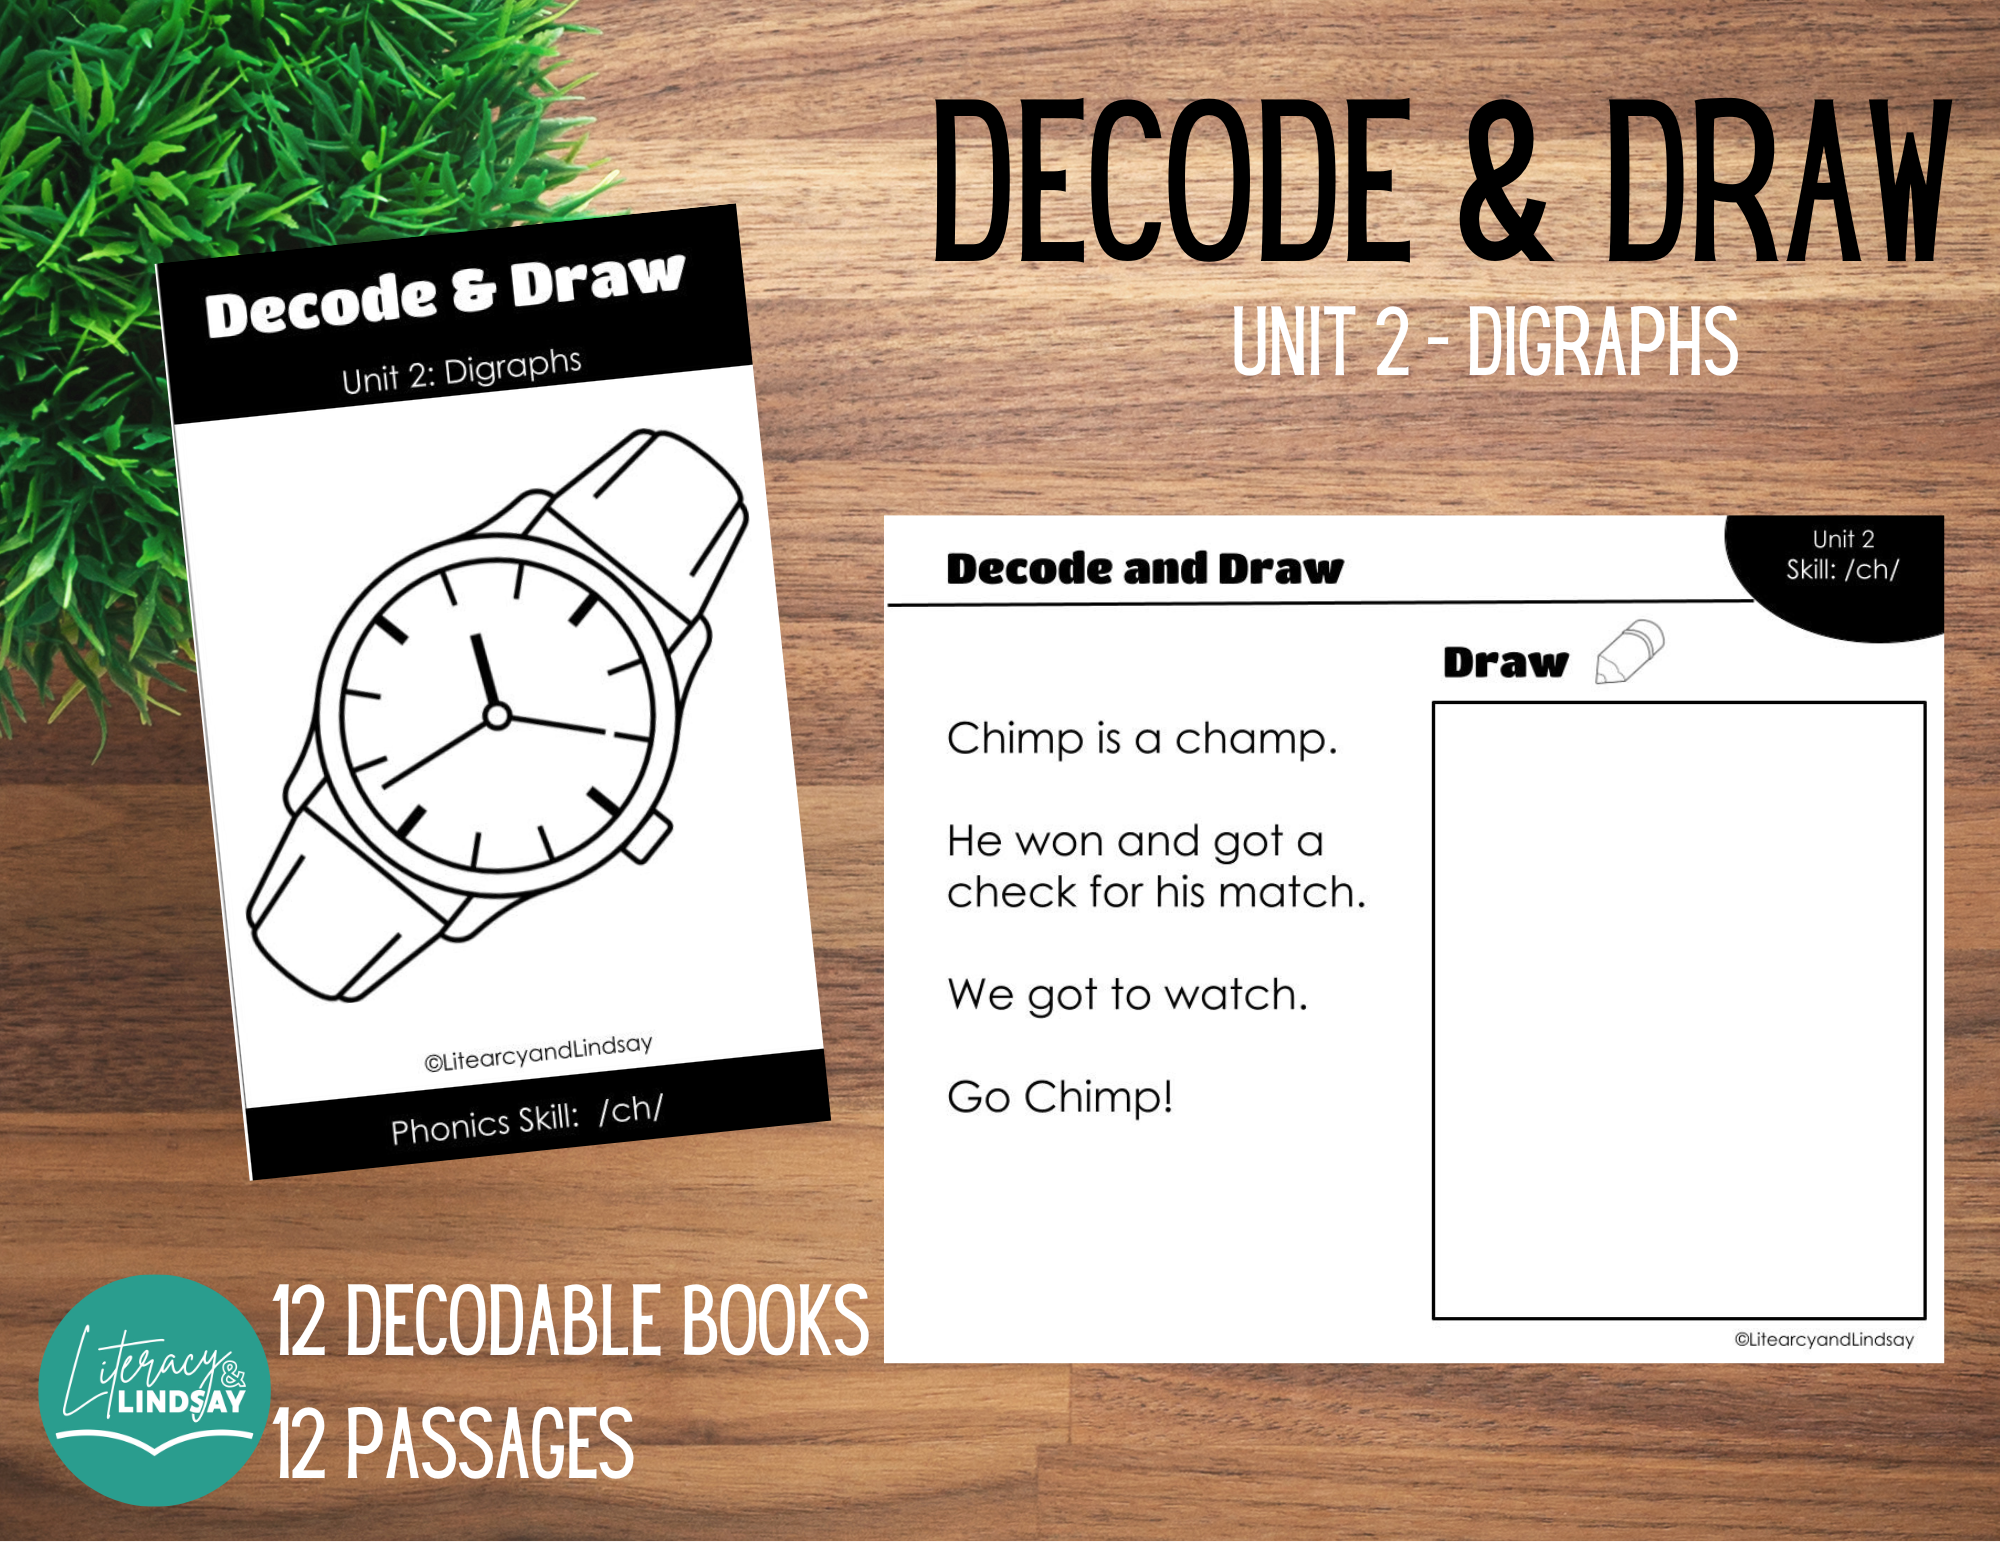 Decode & Draw - Blends and Digraphs